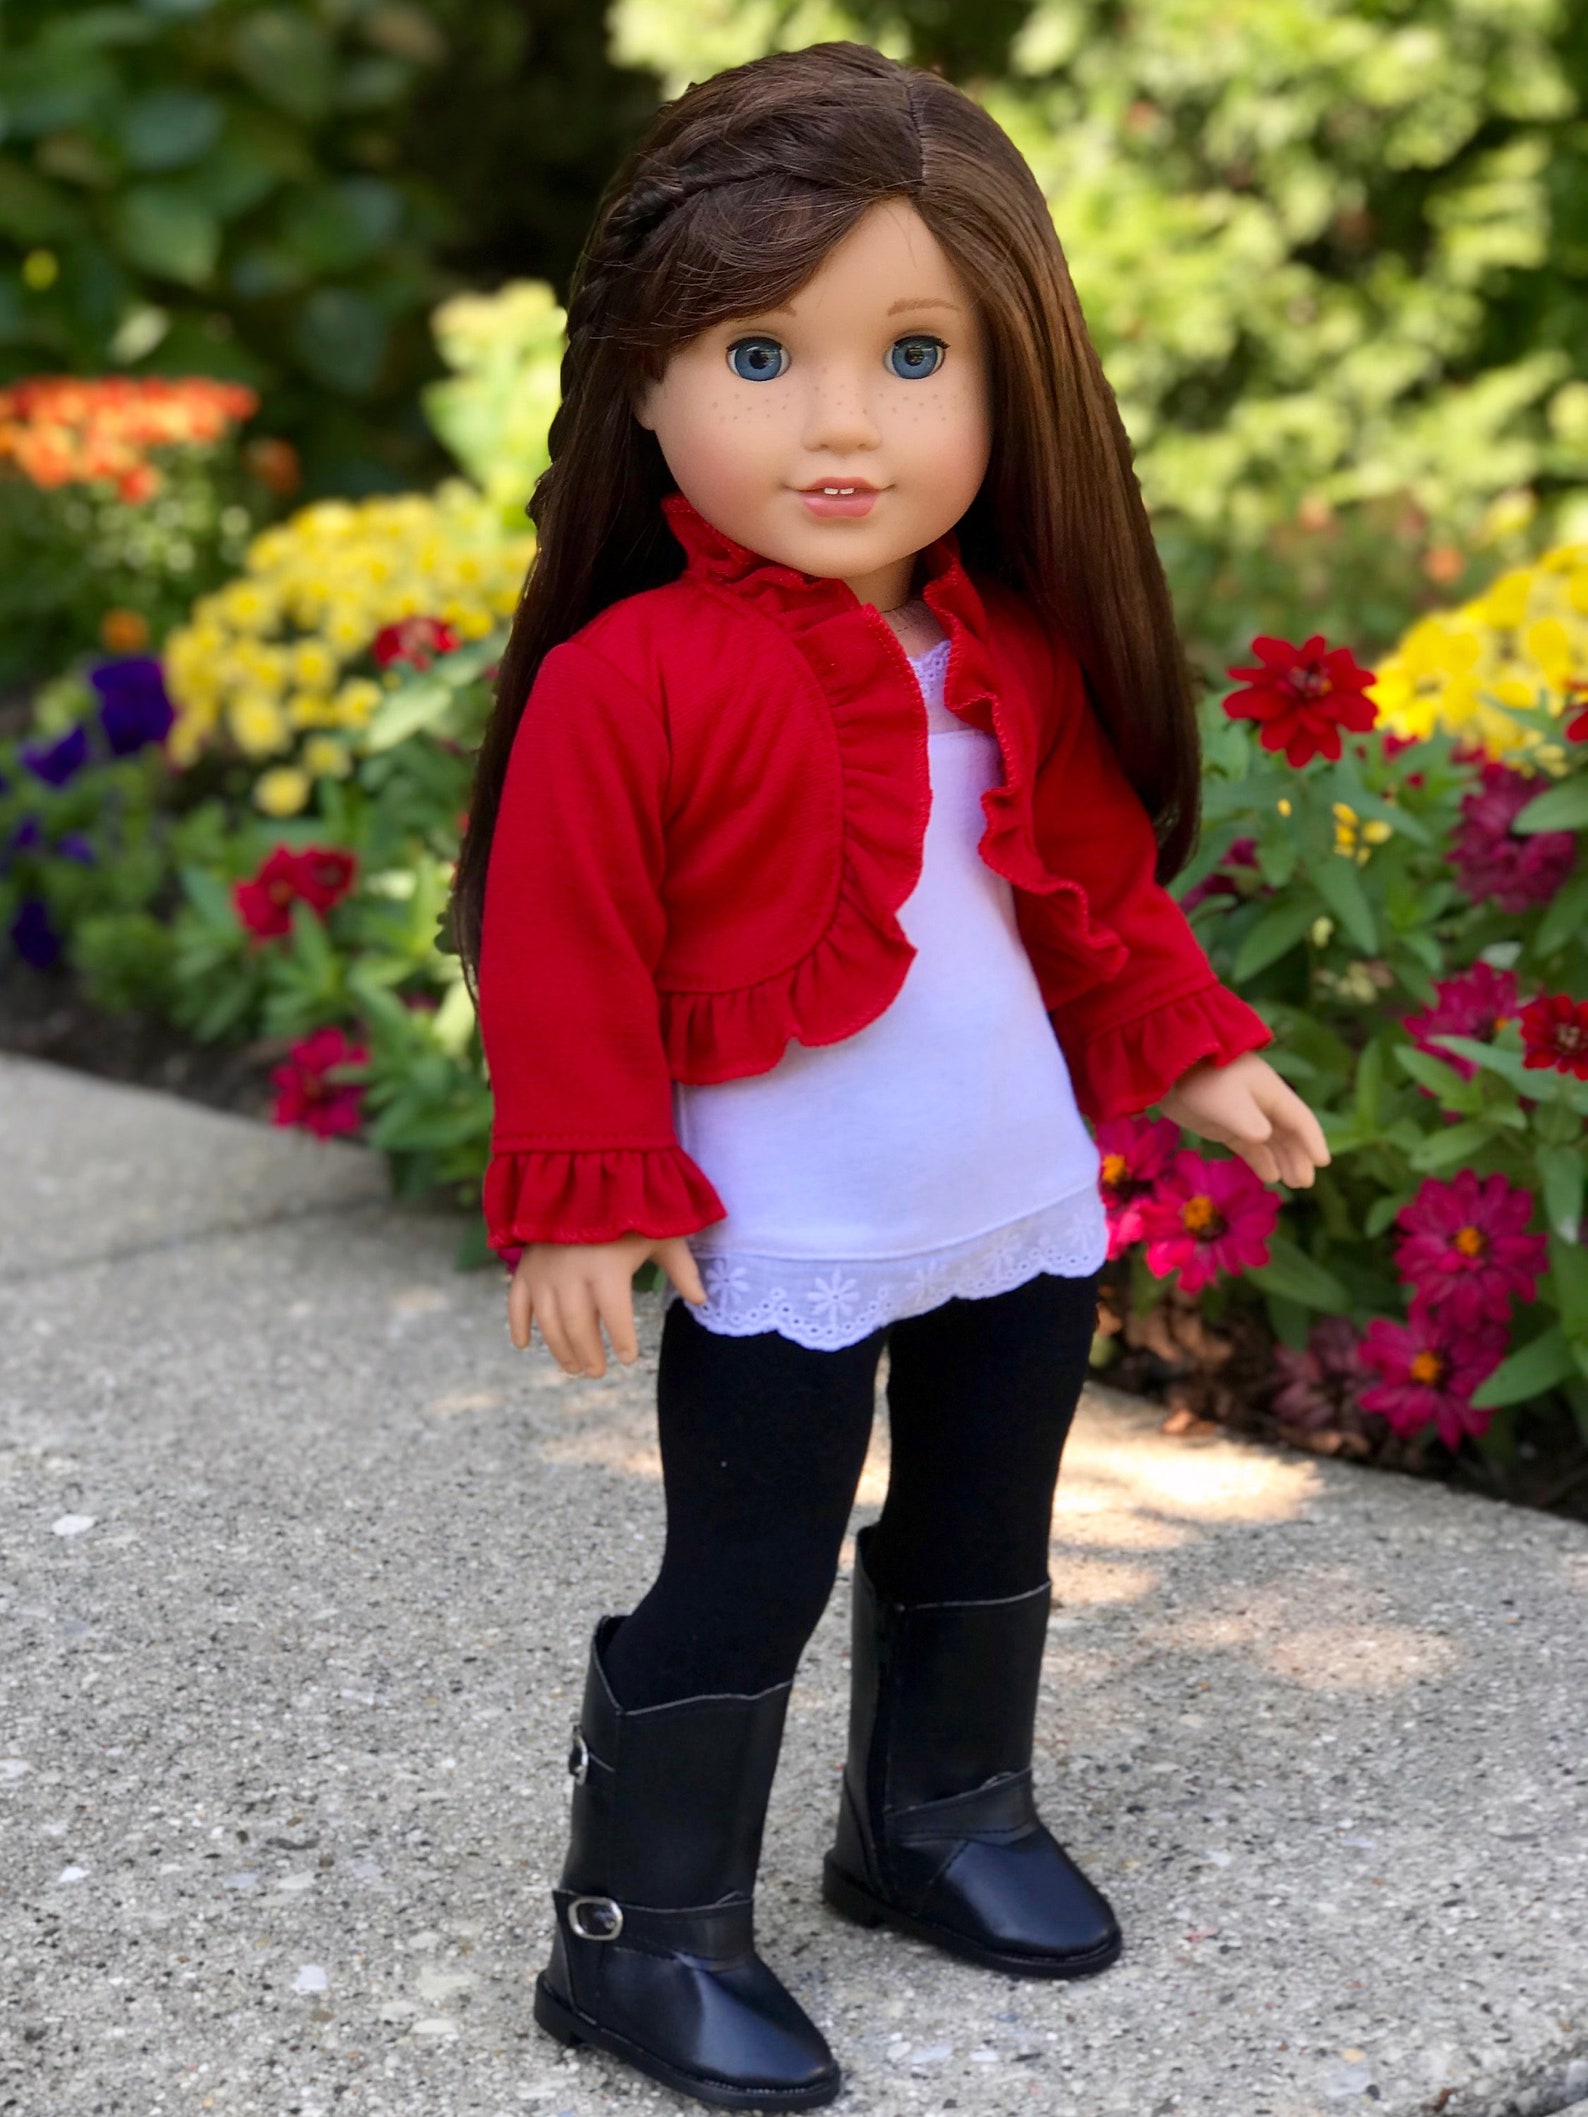 Uptown Girl Doll Clothes for 18 inch American Girl Doll 4 | Etsy